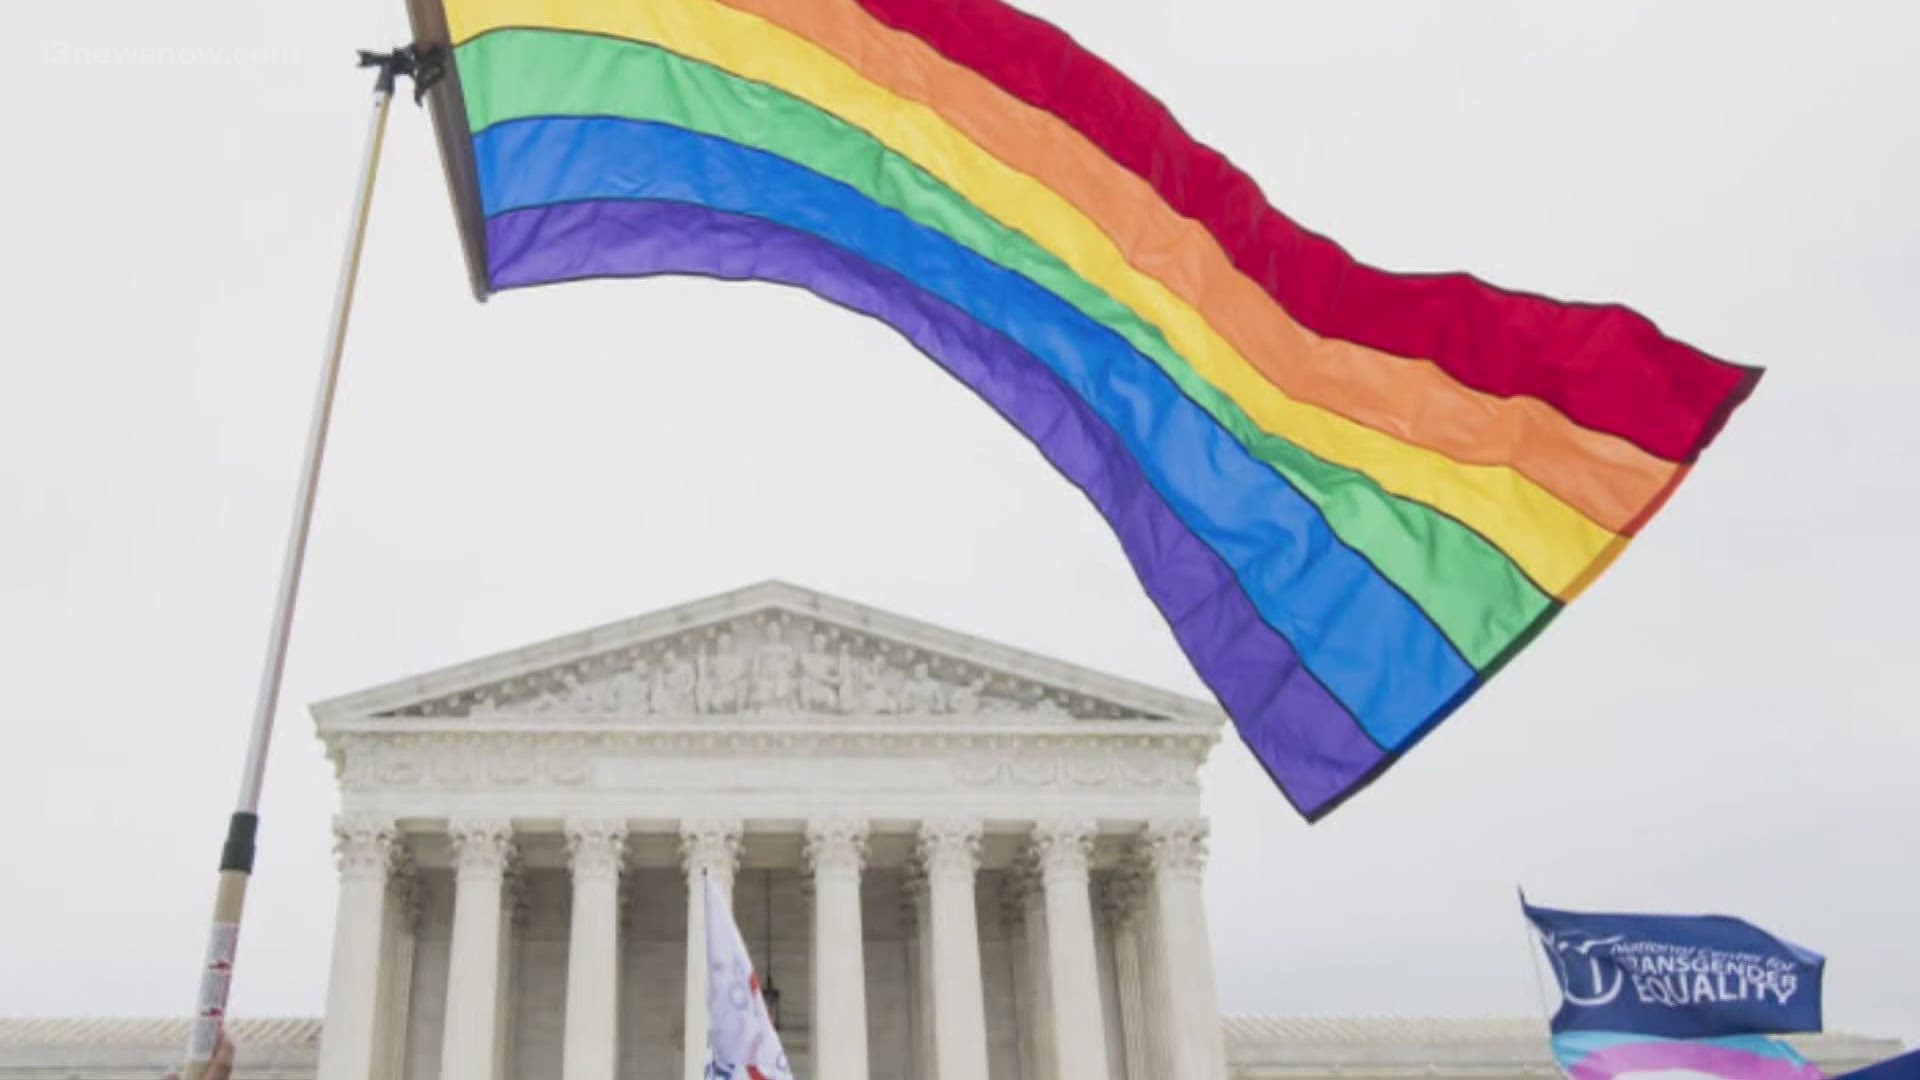 Across Hampton Roads, members of the LGBTQ community are encouraged by the Supreme Court's ruling Monday.